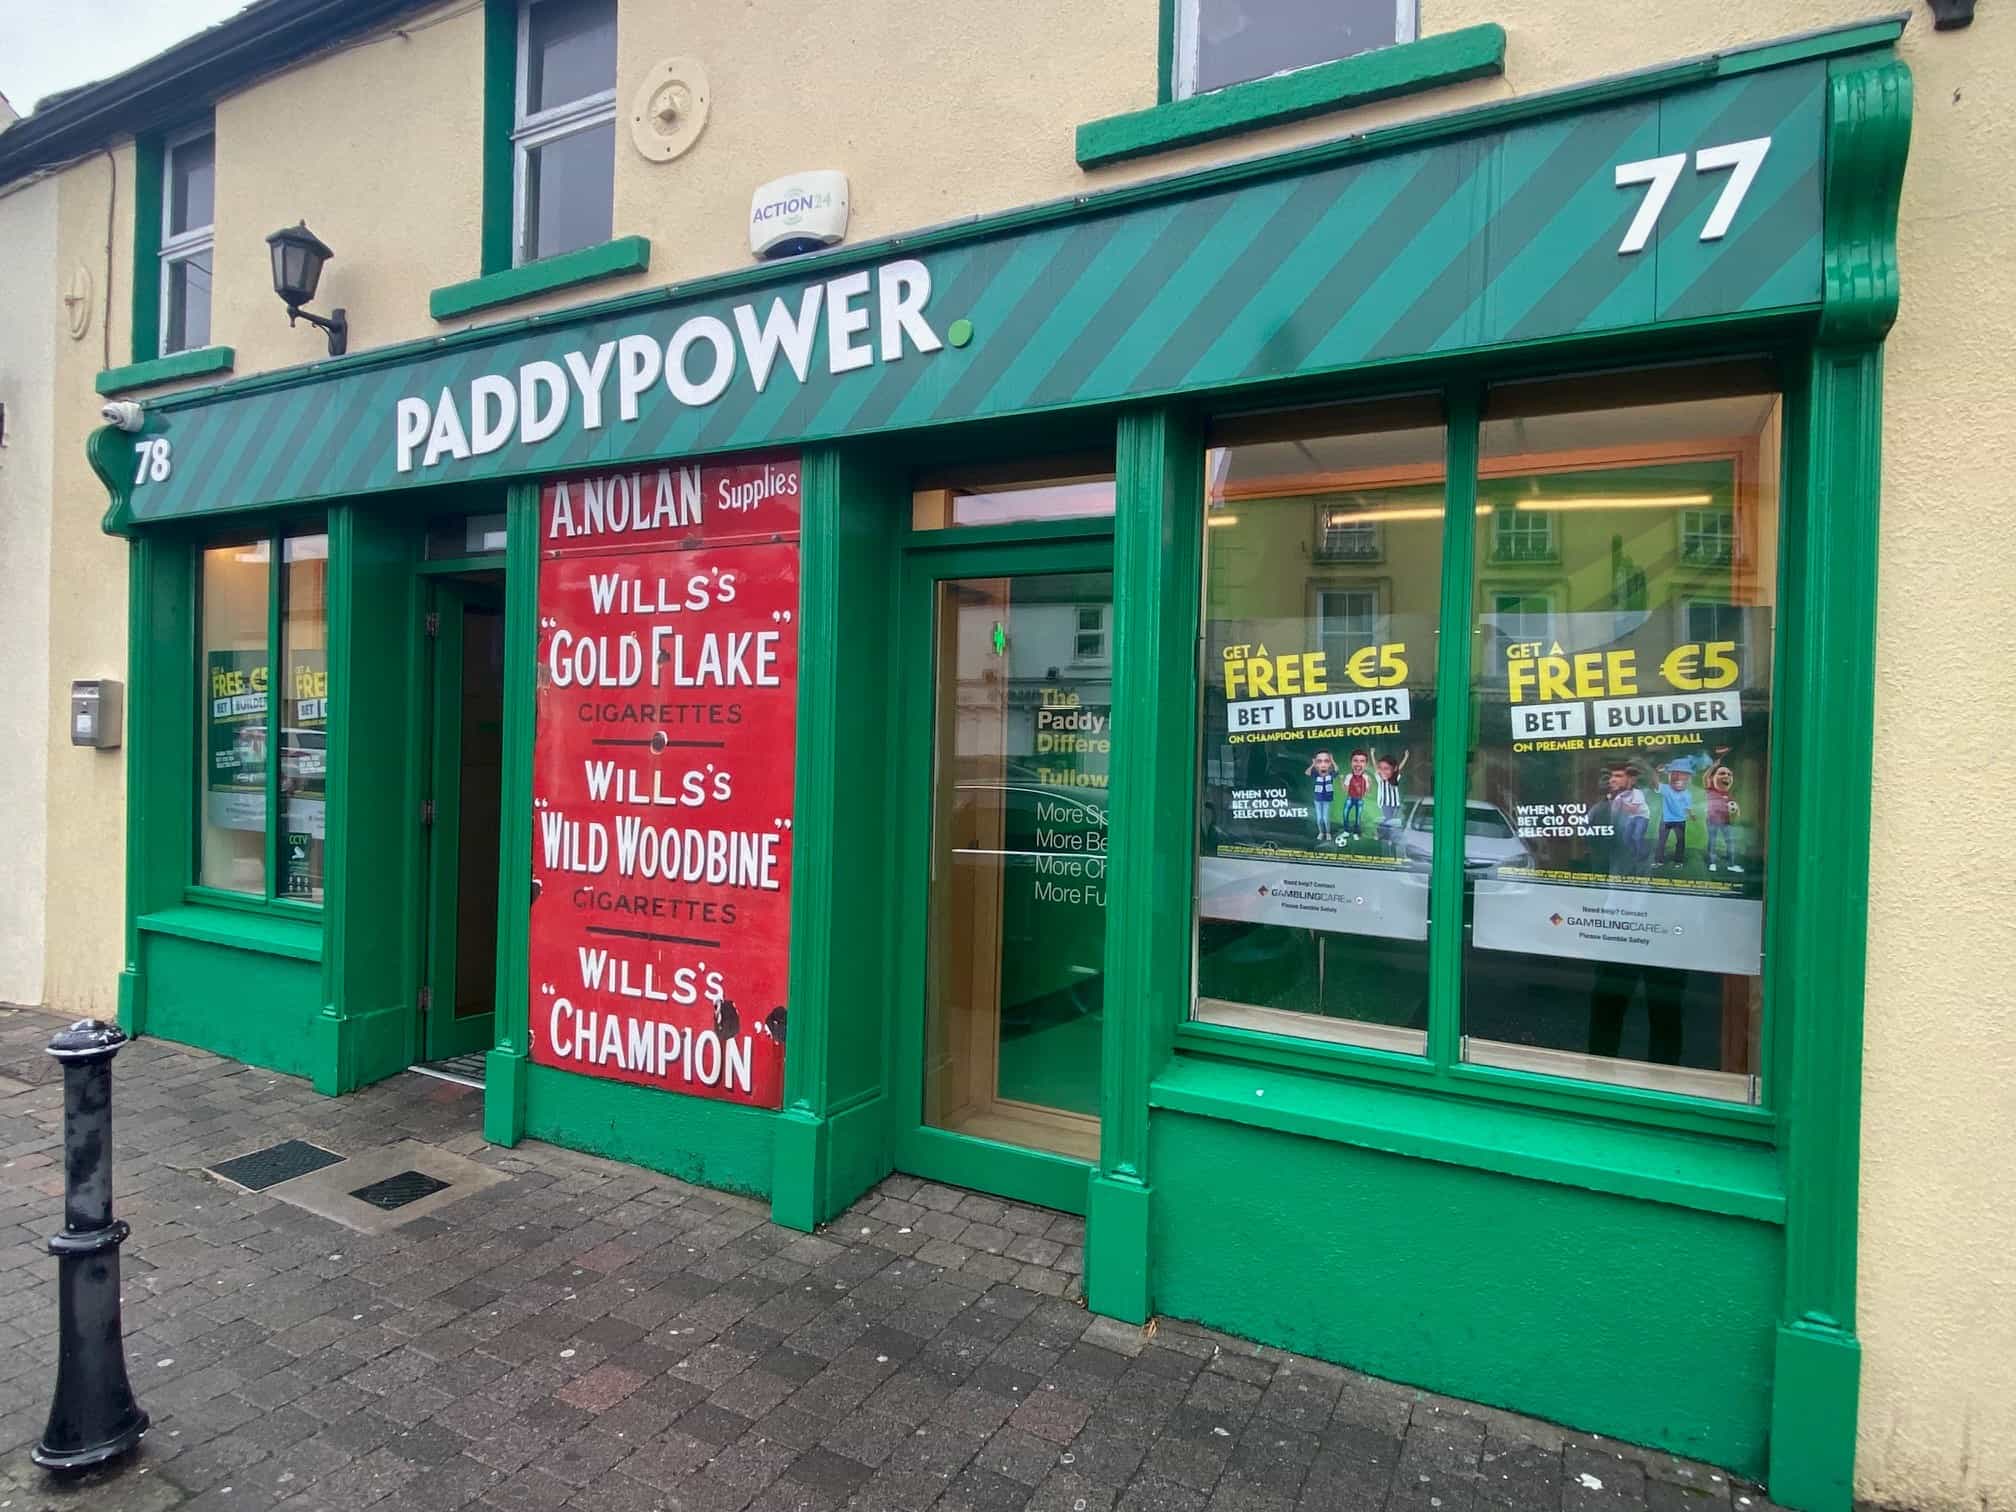 A Paddy Power betting shop in Carlow town, Ireland.